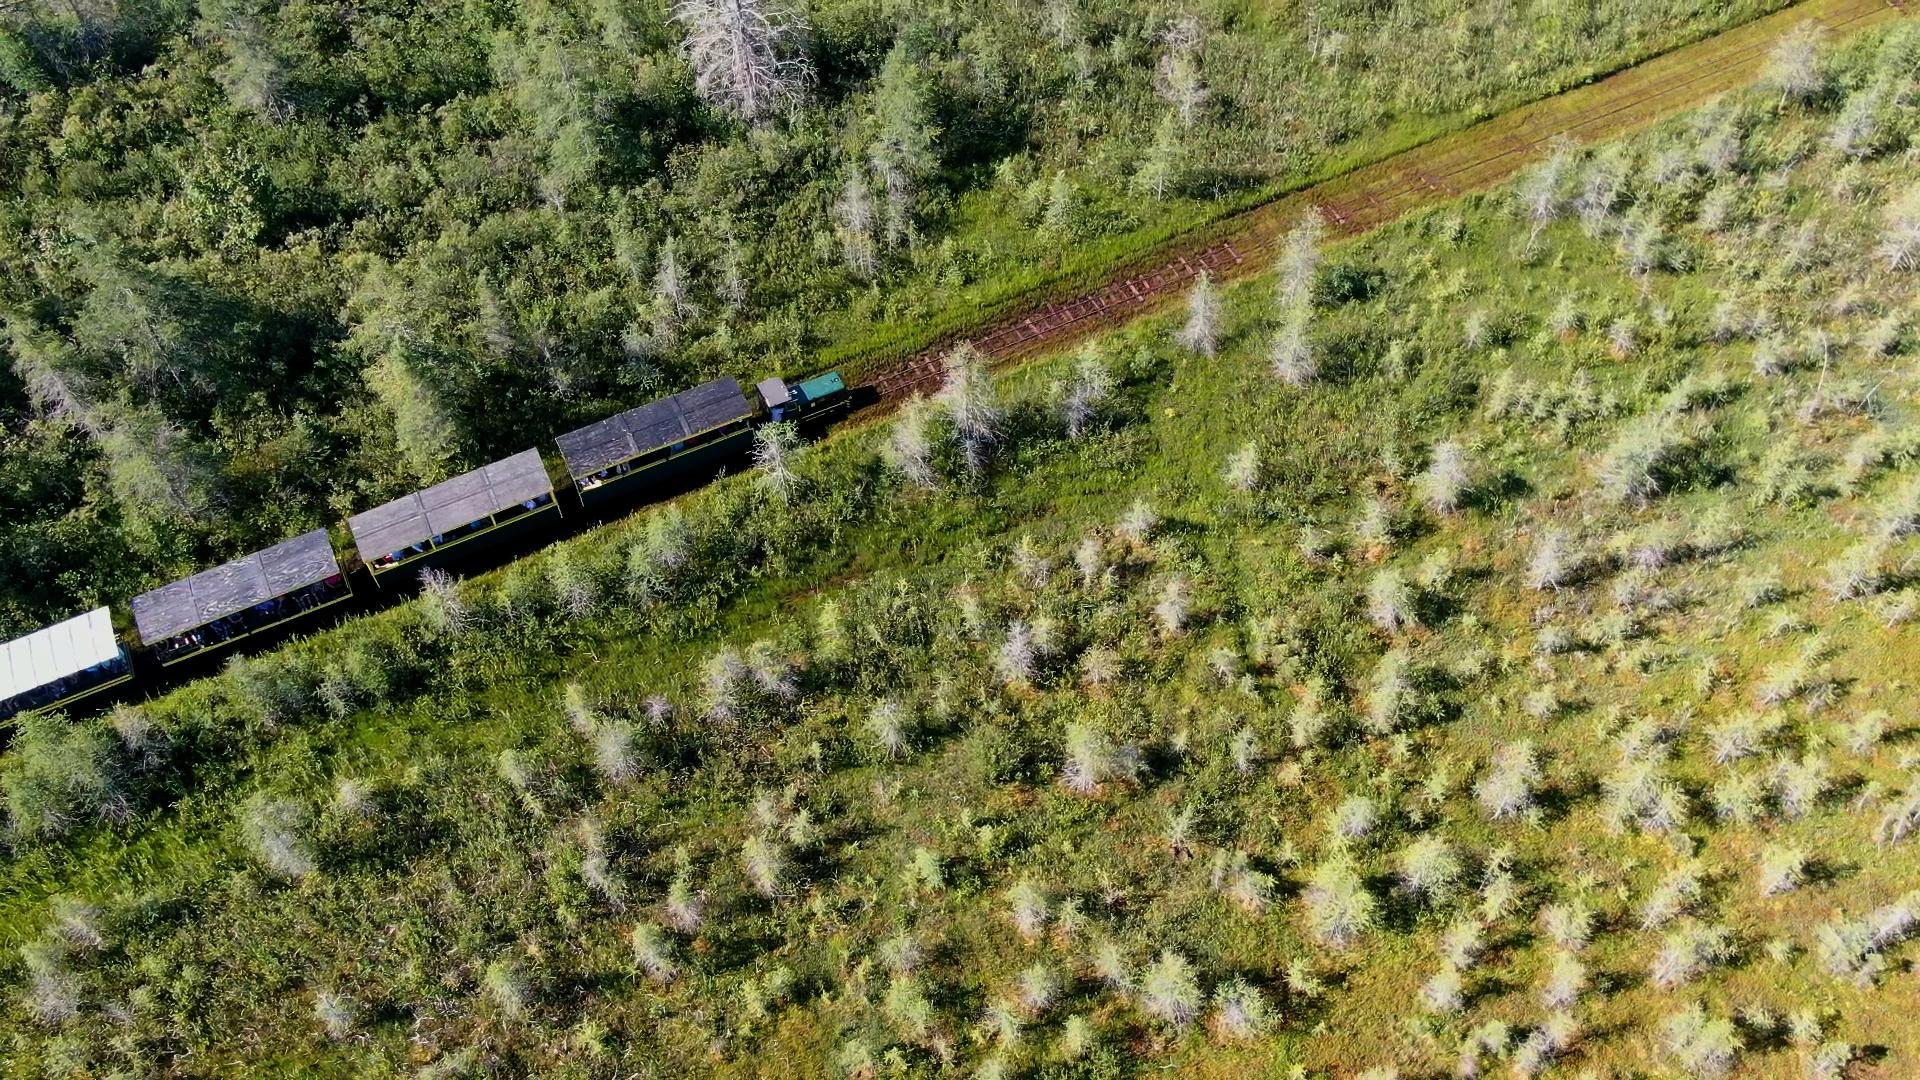 A birdseye view of the Toonerville Trolley passing through trees.